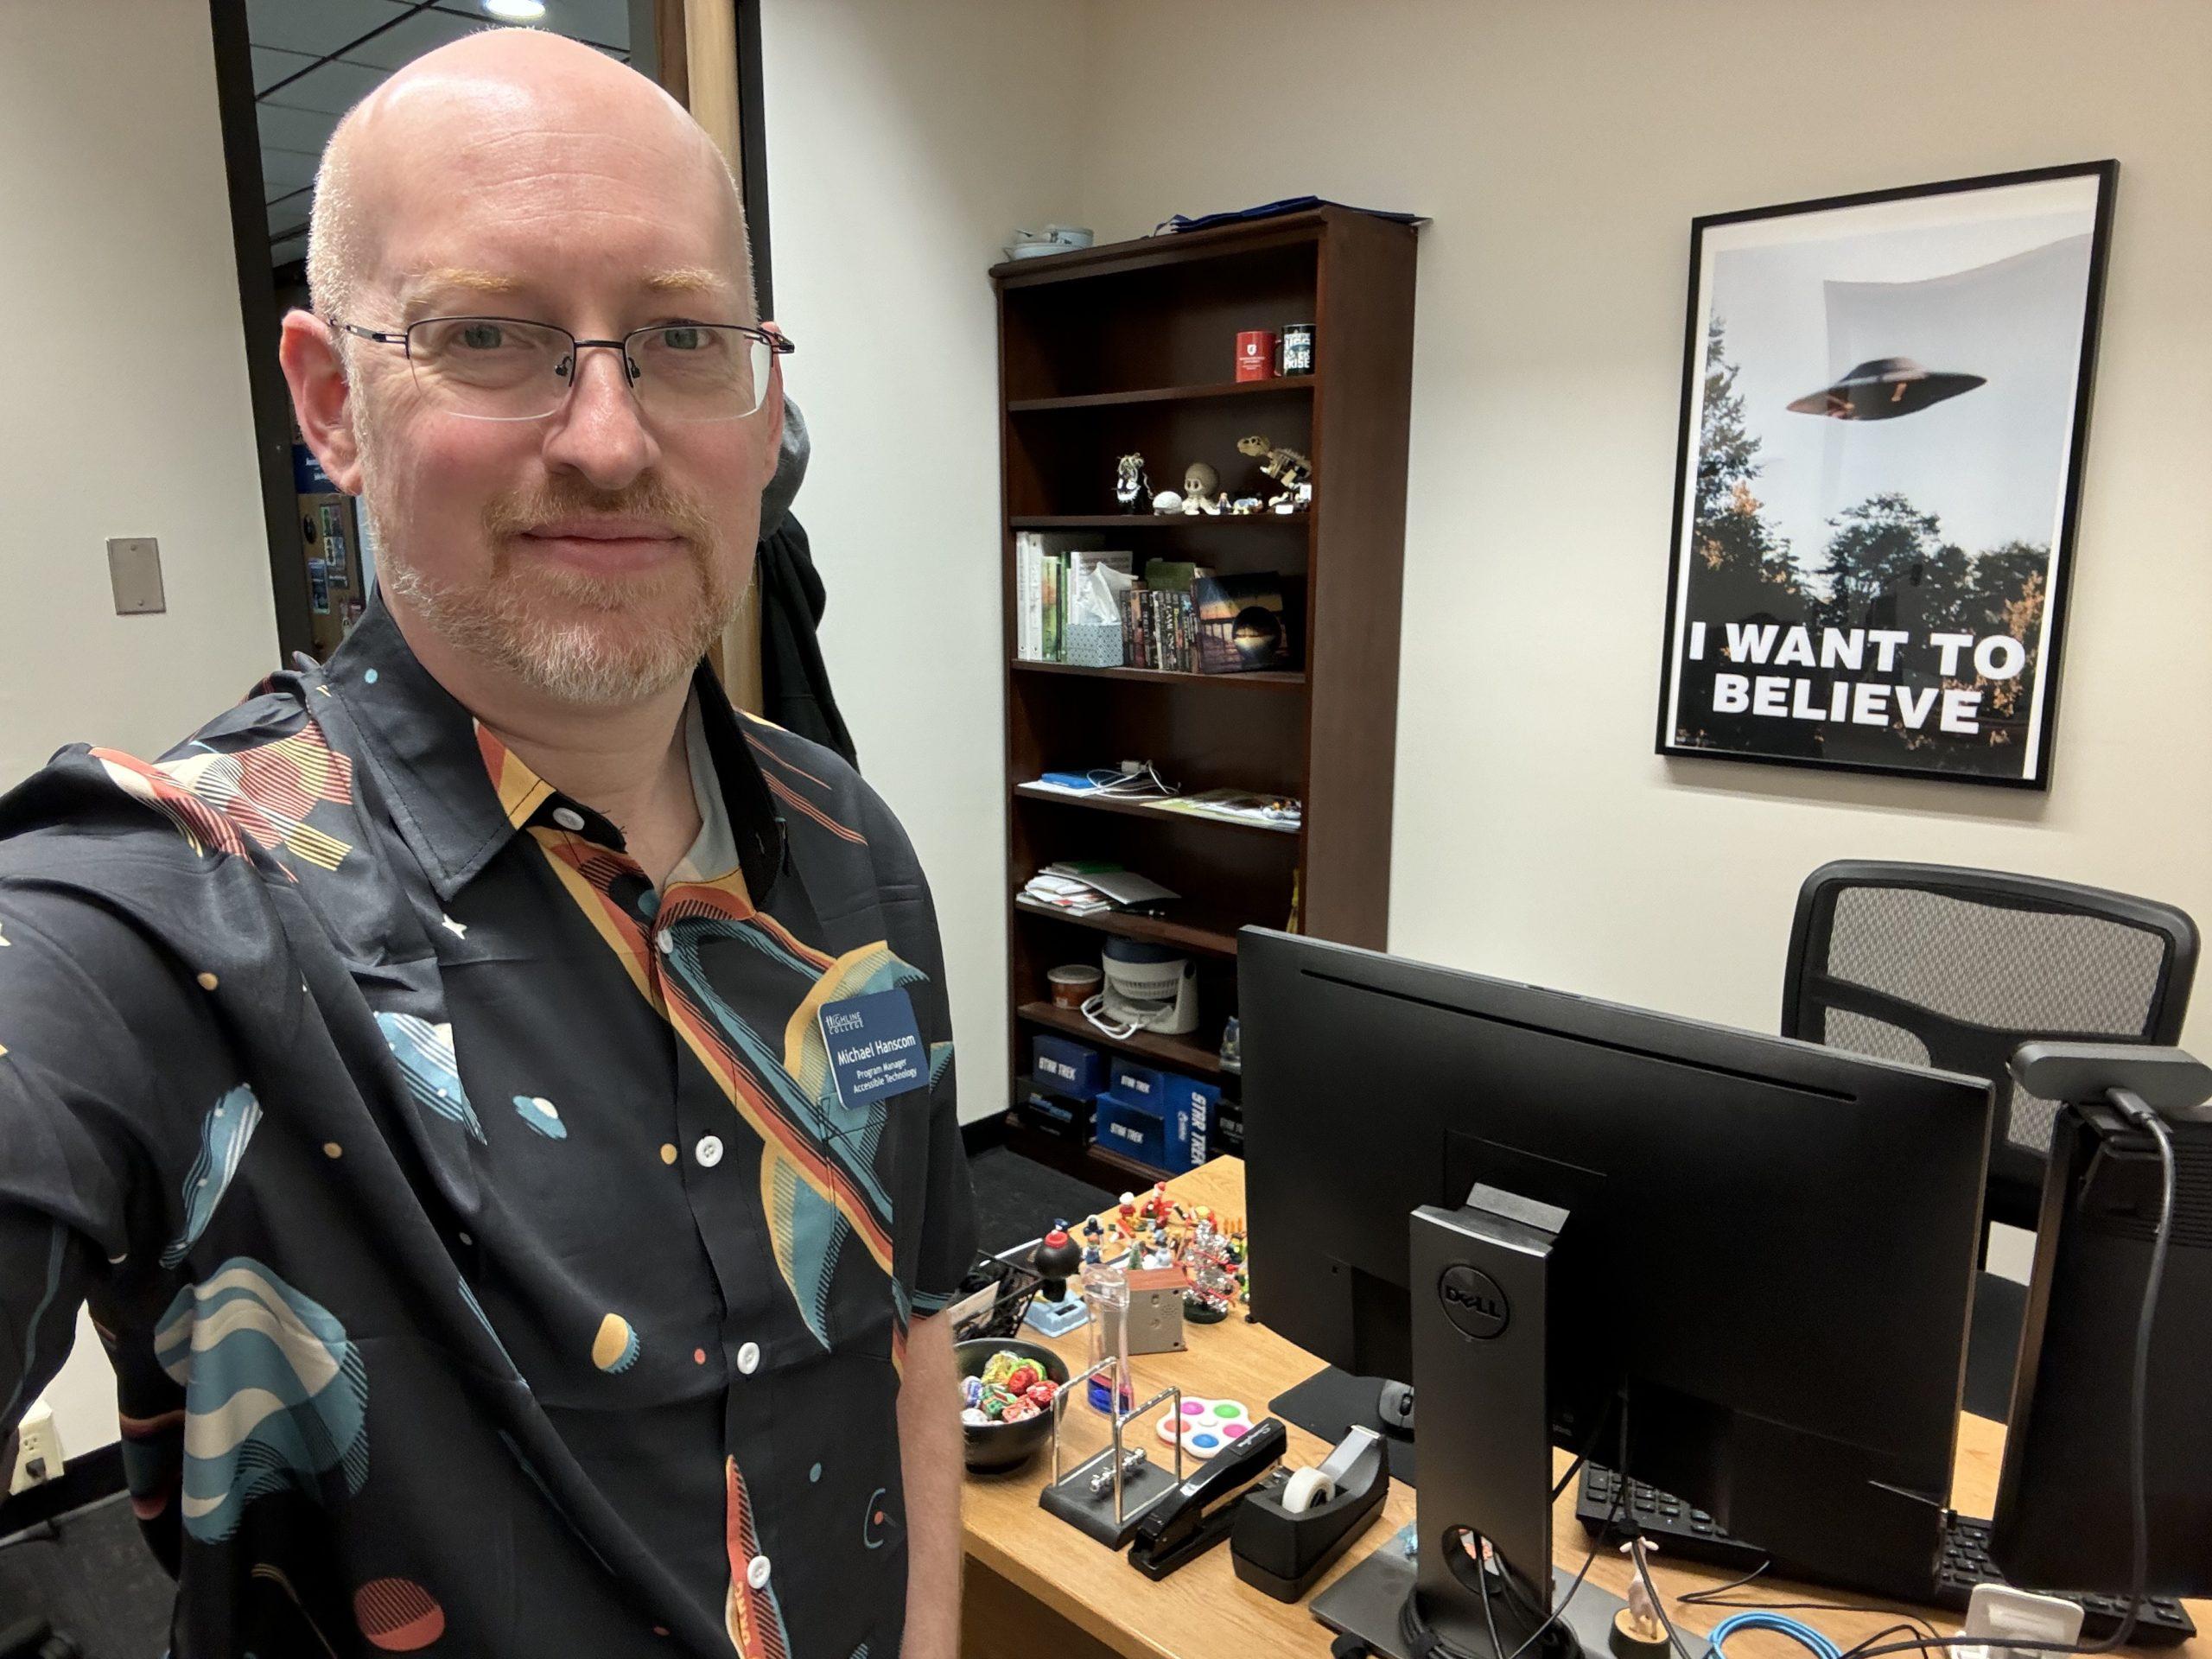 Me in my office at work, wearing a shirt with retro-styled planets and spaceships.